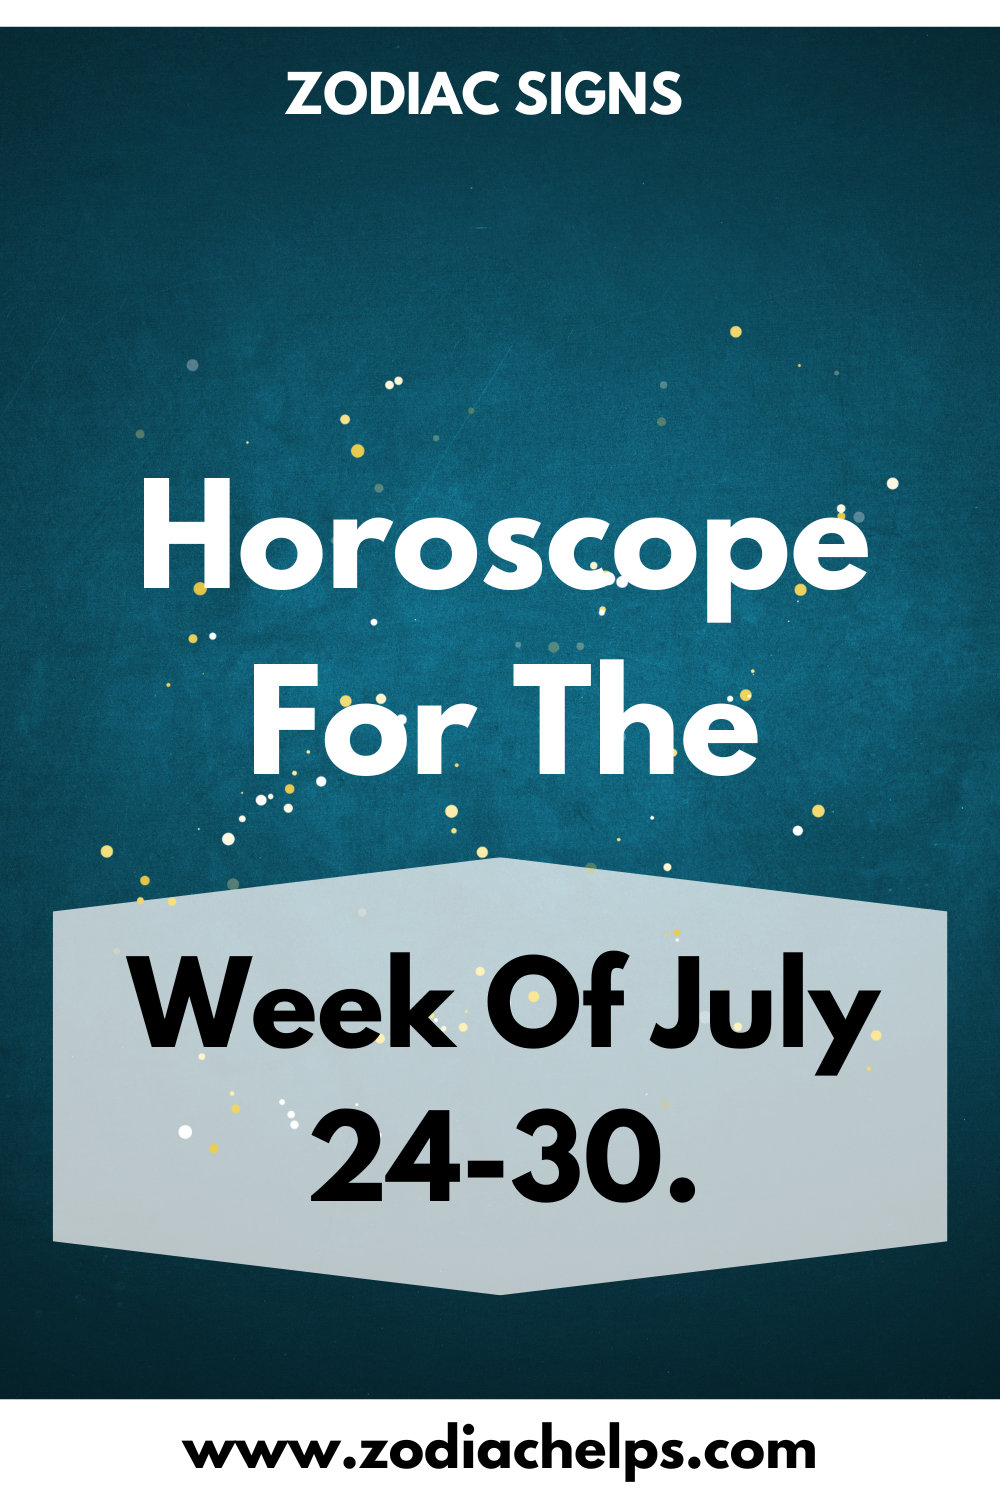 Horoscope For The Week Of July 24-30.